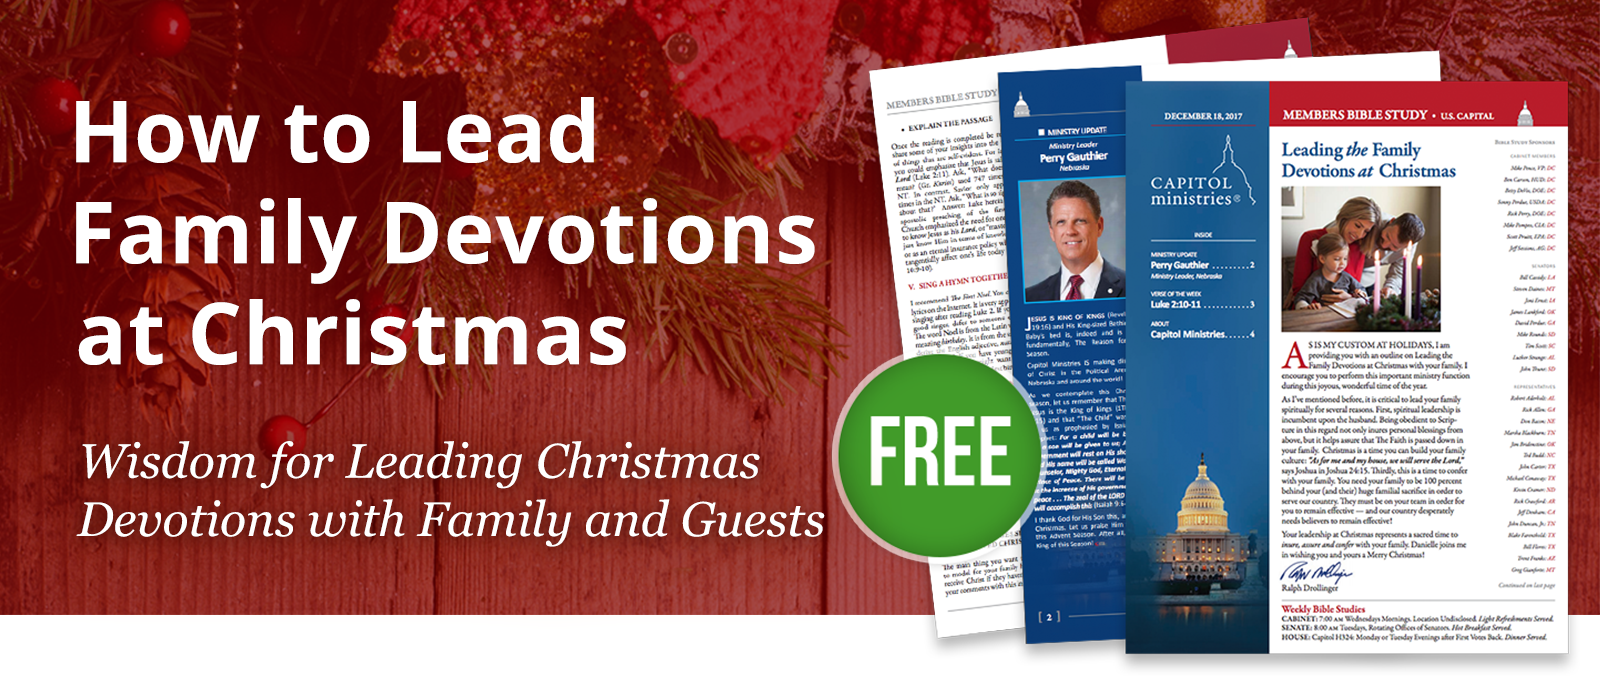 How to Lead Family Devotions at Christmas - Wisdom for Leading Christmas Devotions with Family and Guests